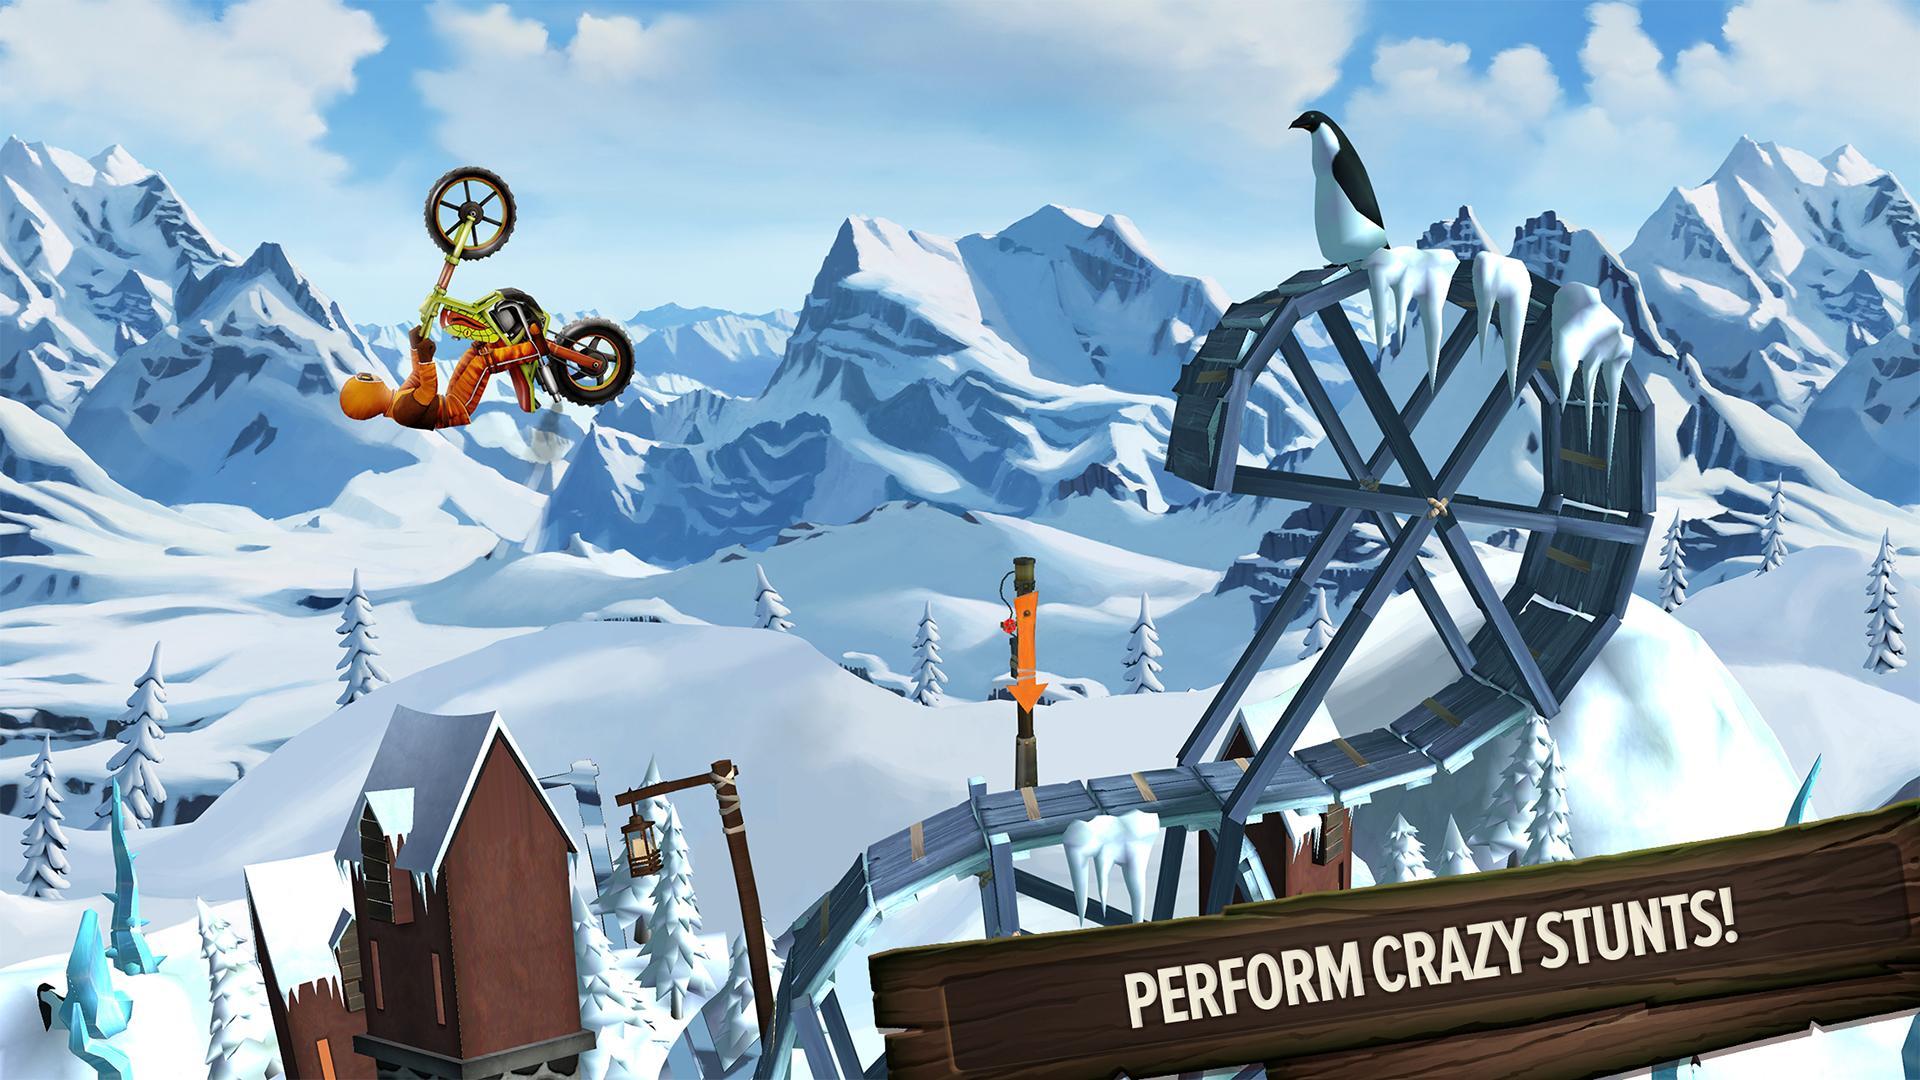 Trials Frontier MOD APK 7.9.4 (Free Shopping)